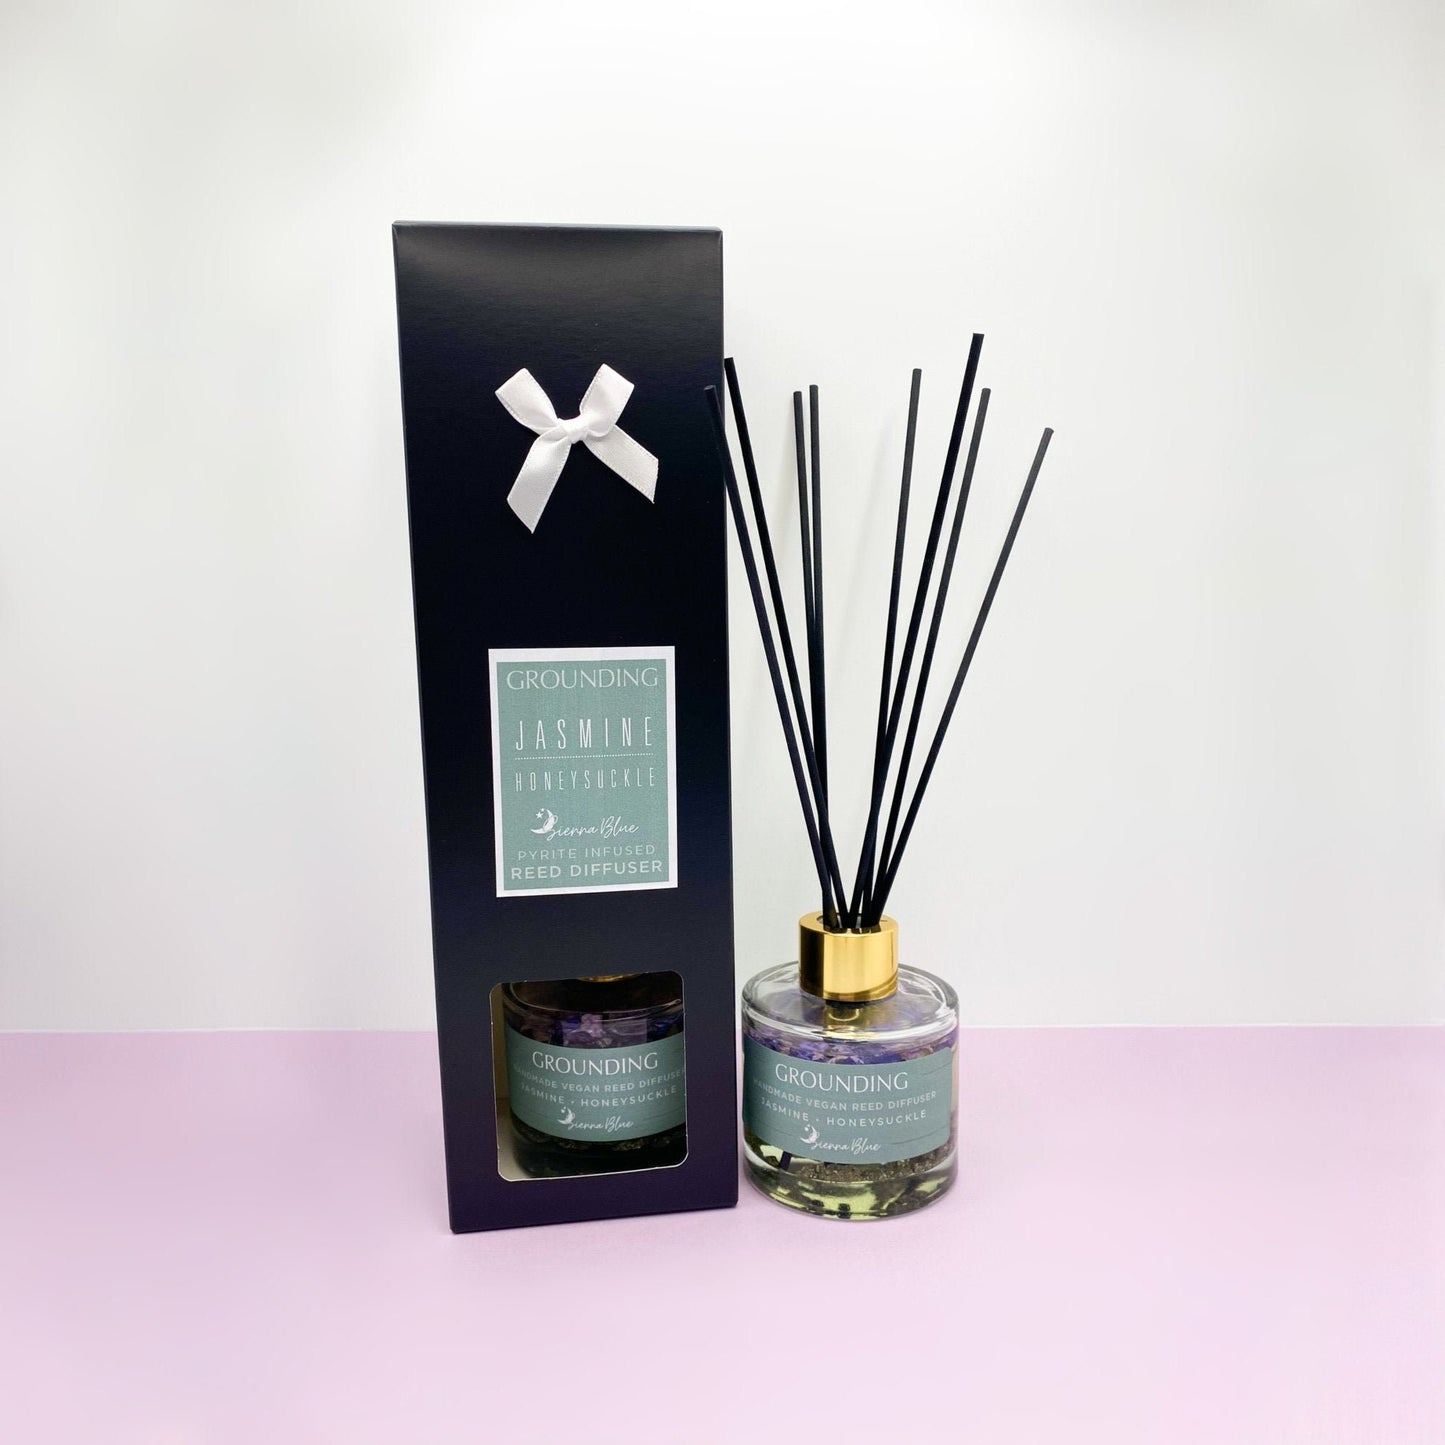 Grounding reed diffuser